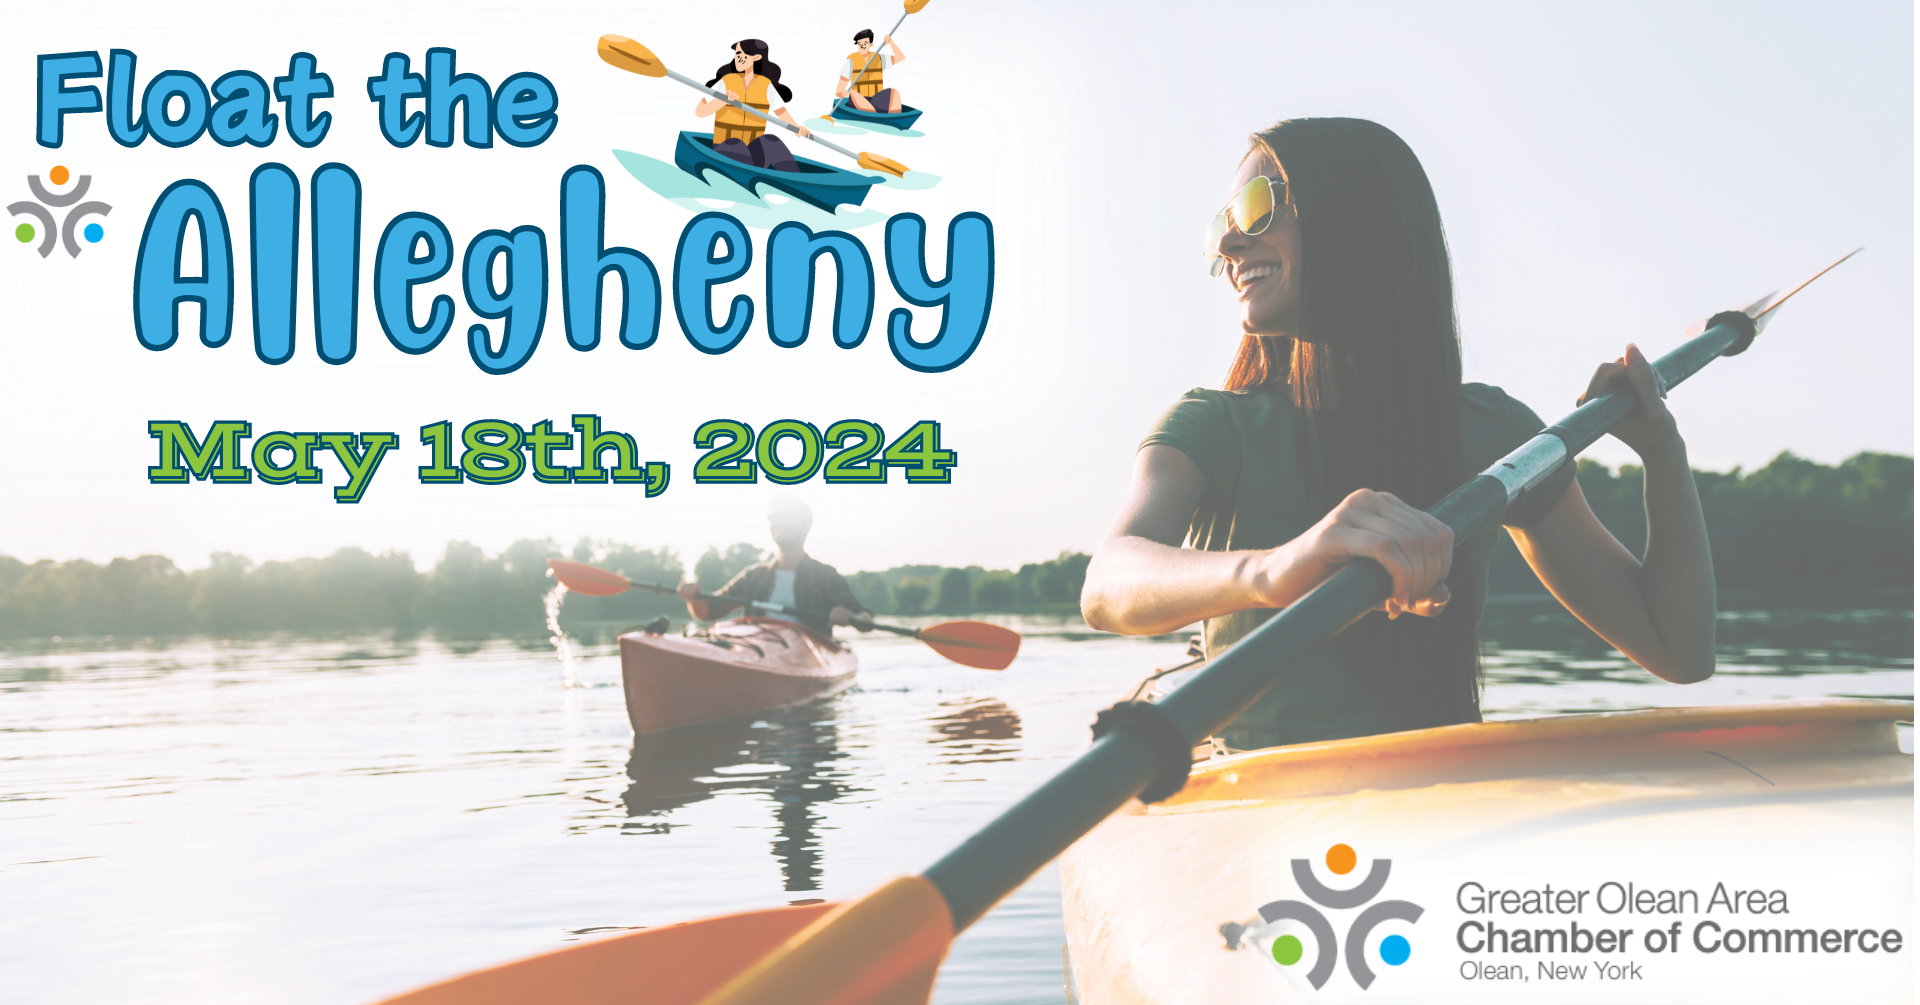 Float the Allegheny event on May 18, 2024 - Greater Olean Area Chamber of Commerce